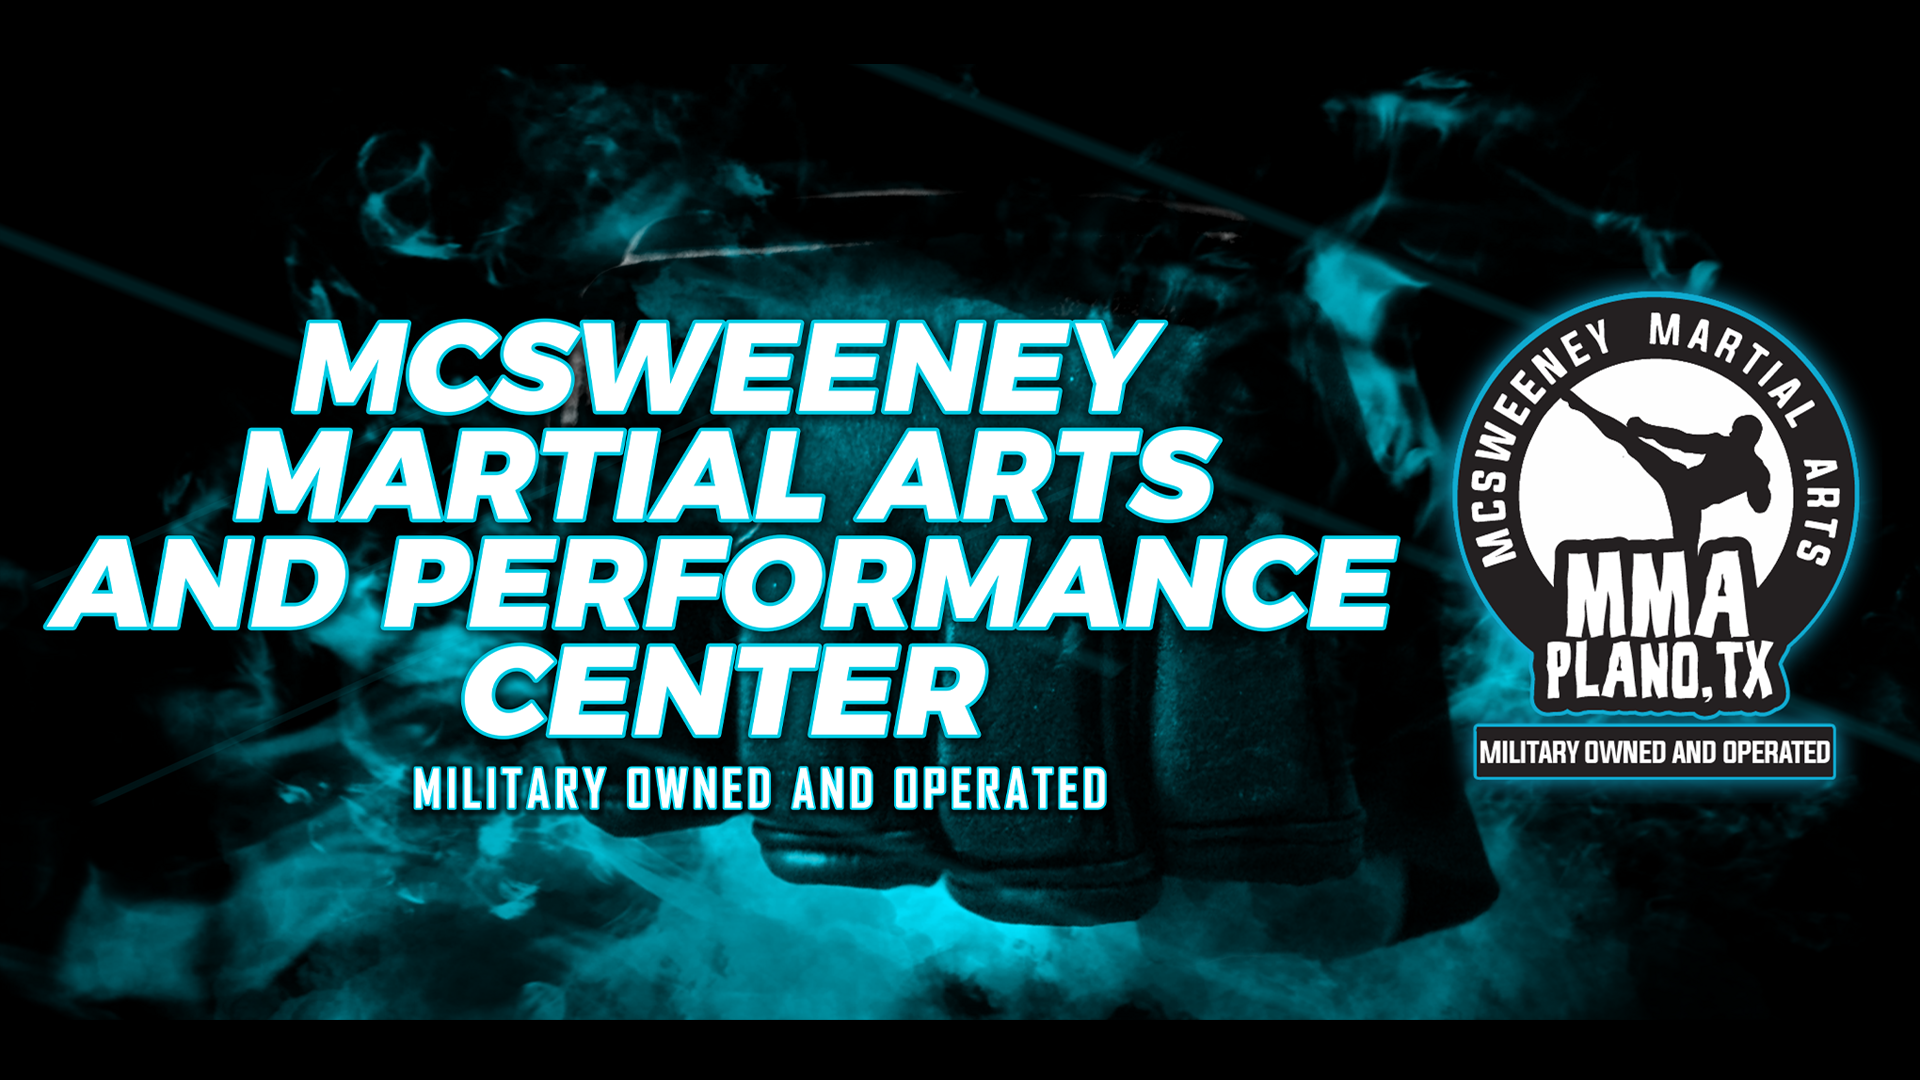 Mcsweeney Martial Arts and Performance Center